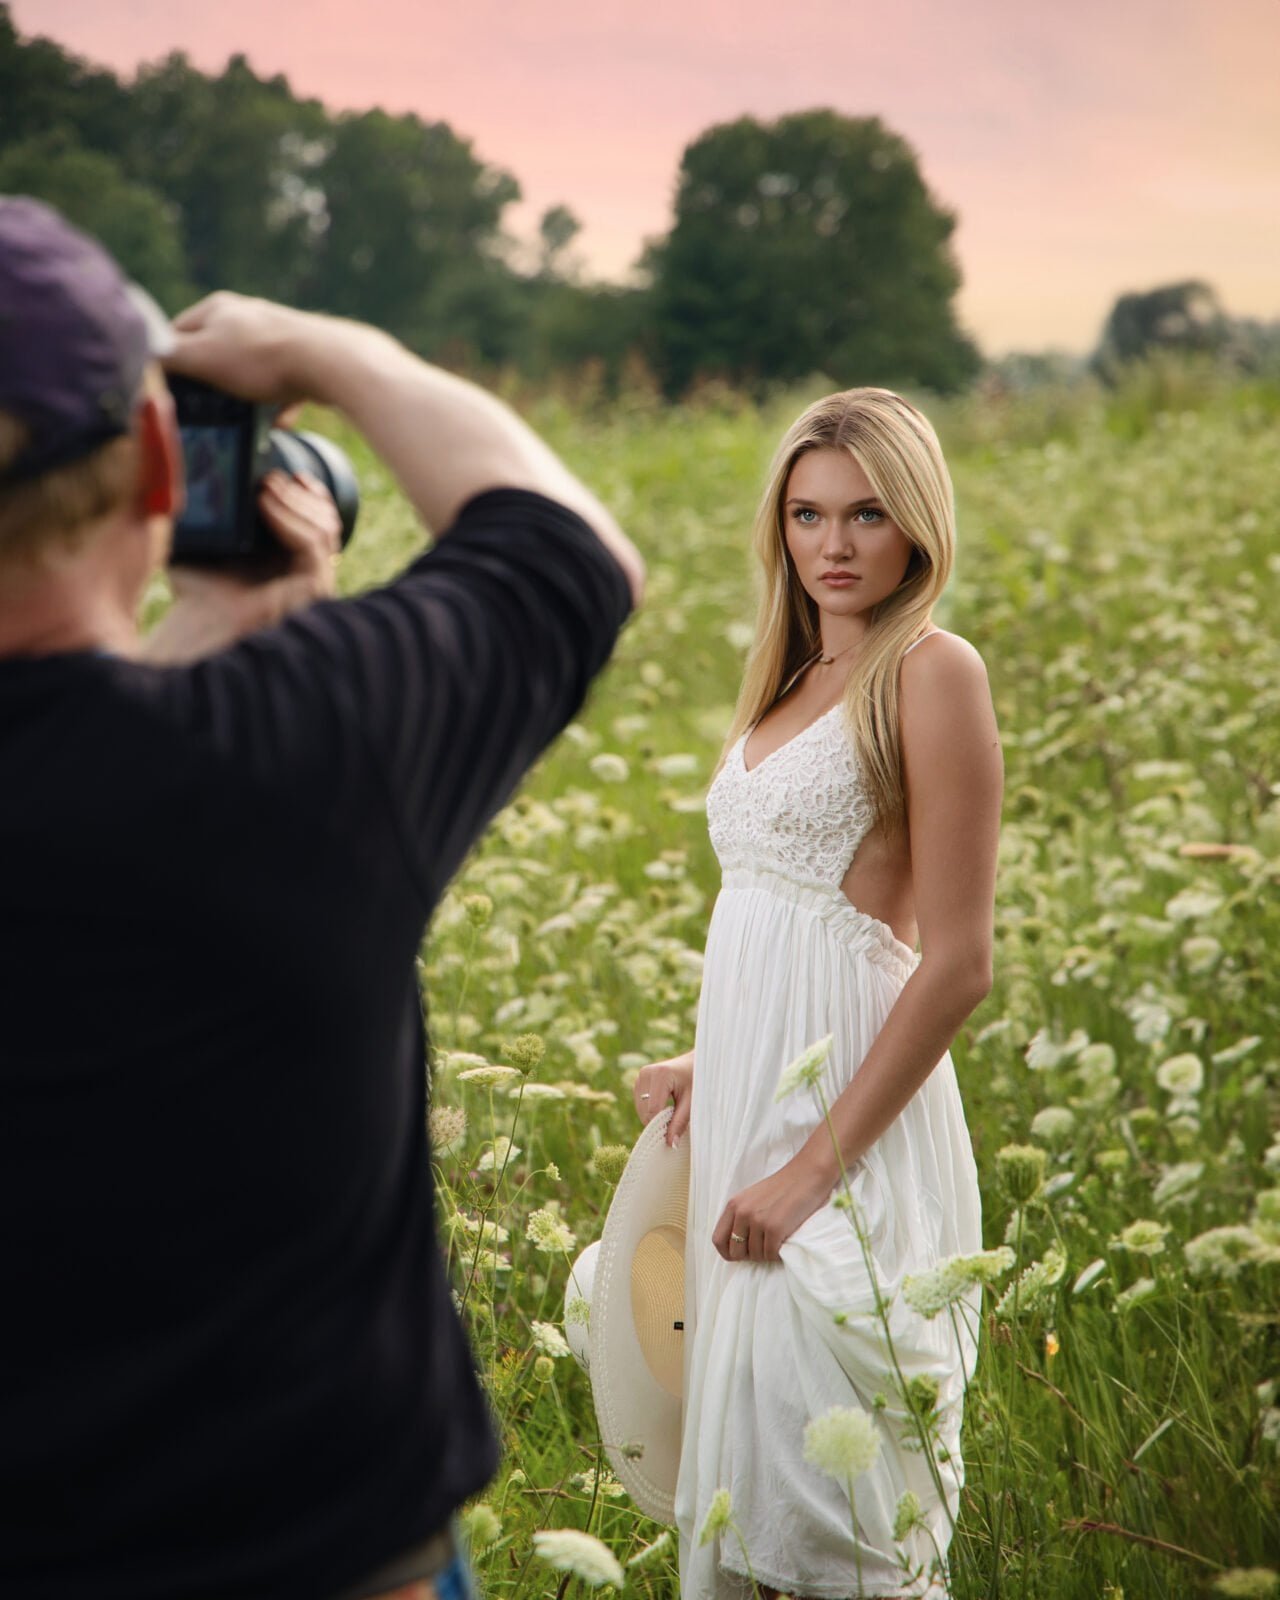 A man in a hat and a black shirt is taking a picture of a girl in a field of wild white flowers in a white dress.